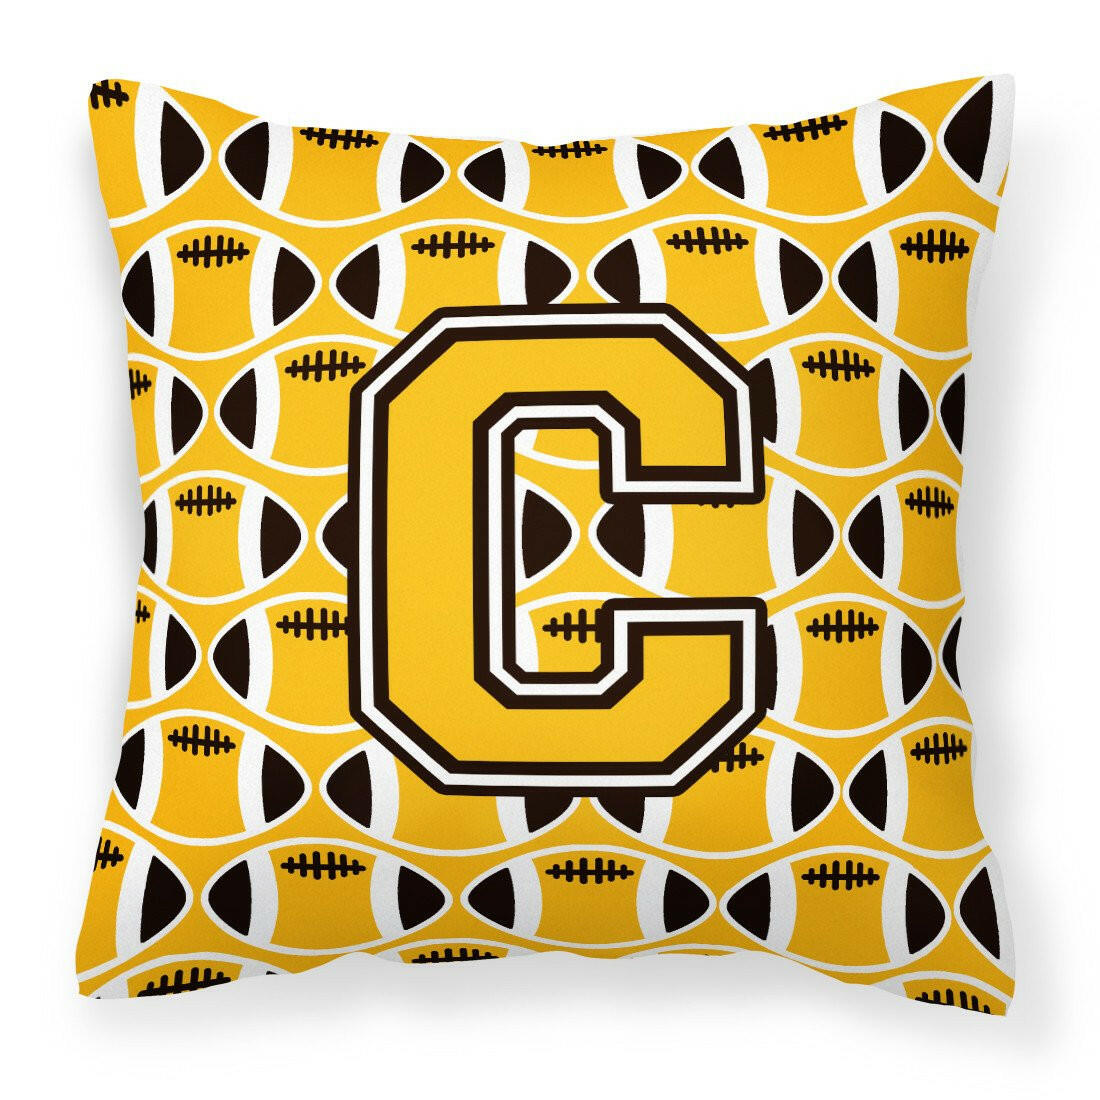 Letter C Football Black, Old Gold and White Fabric Decorative Pillow CJ1080-CPW1414 by Caroline's Treasures